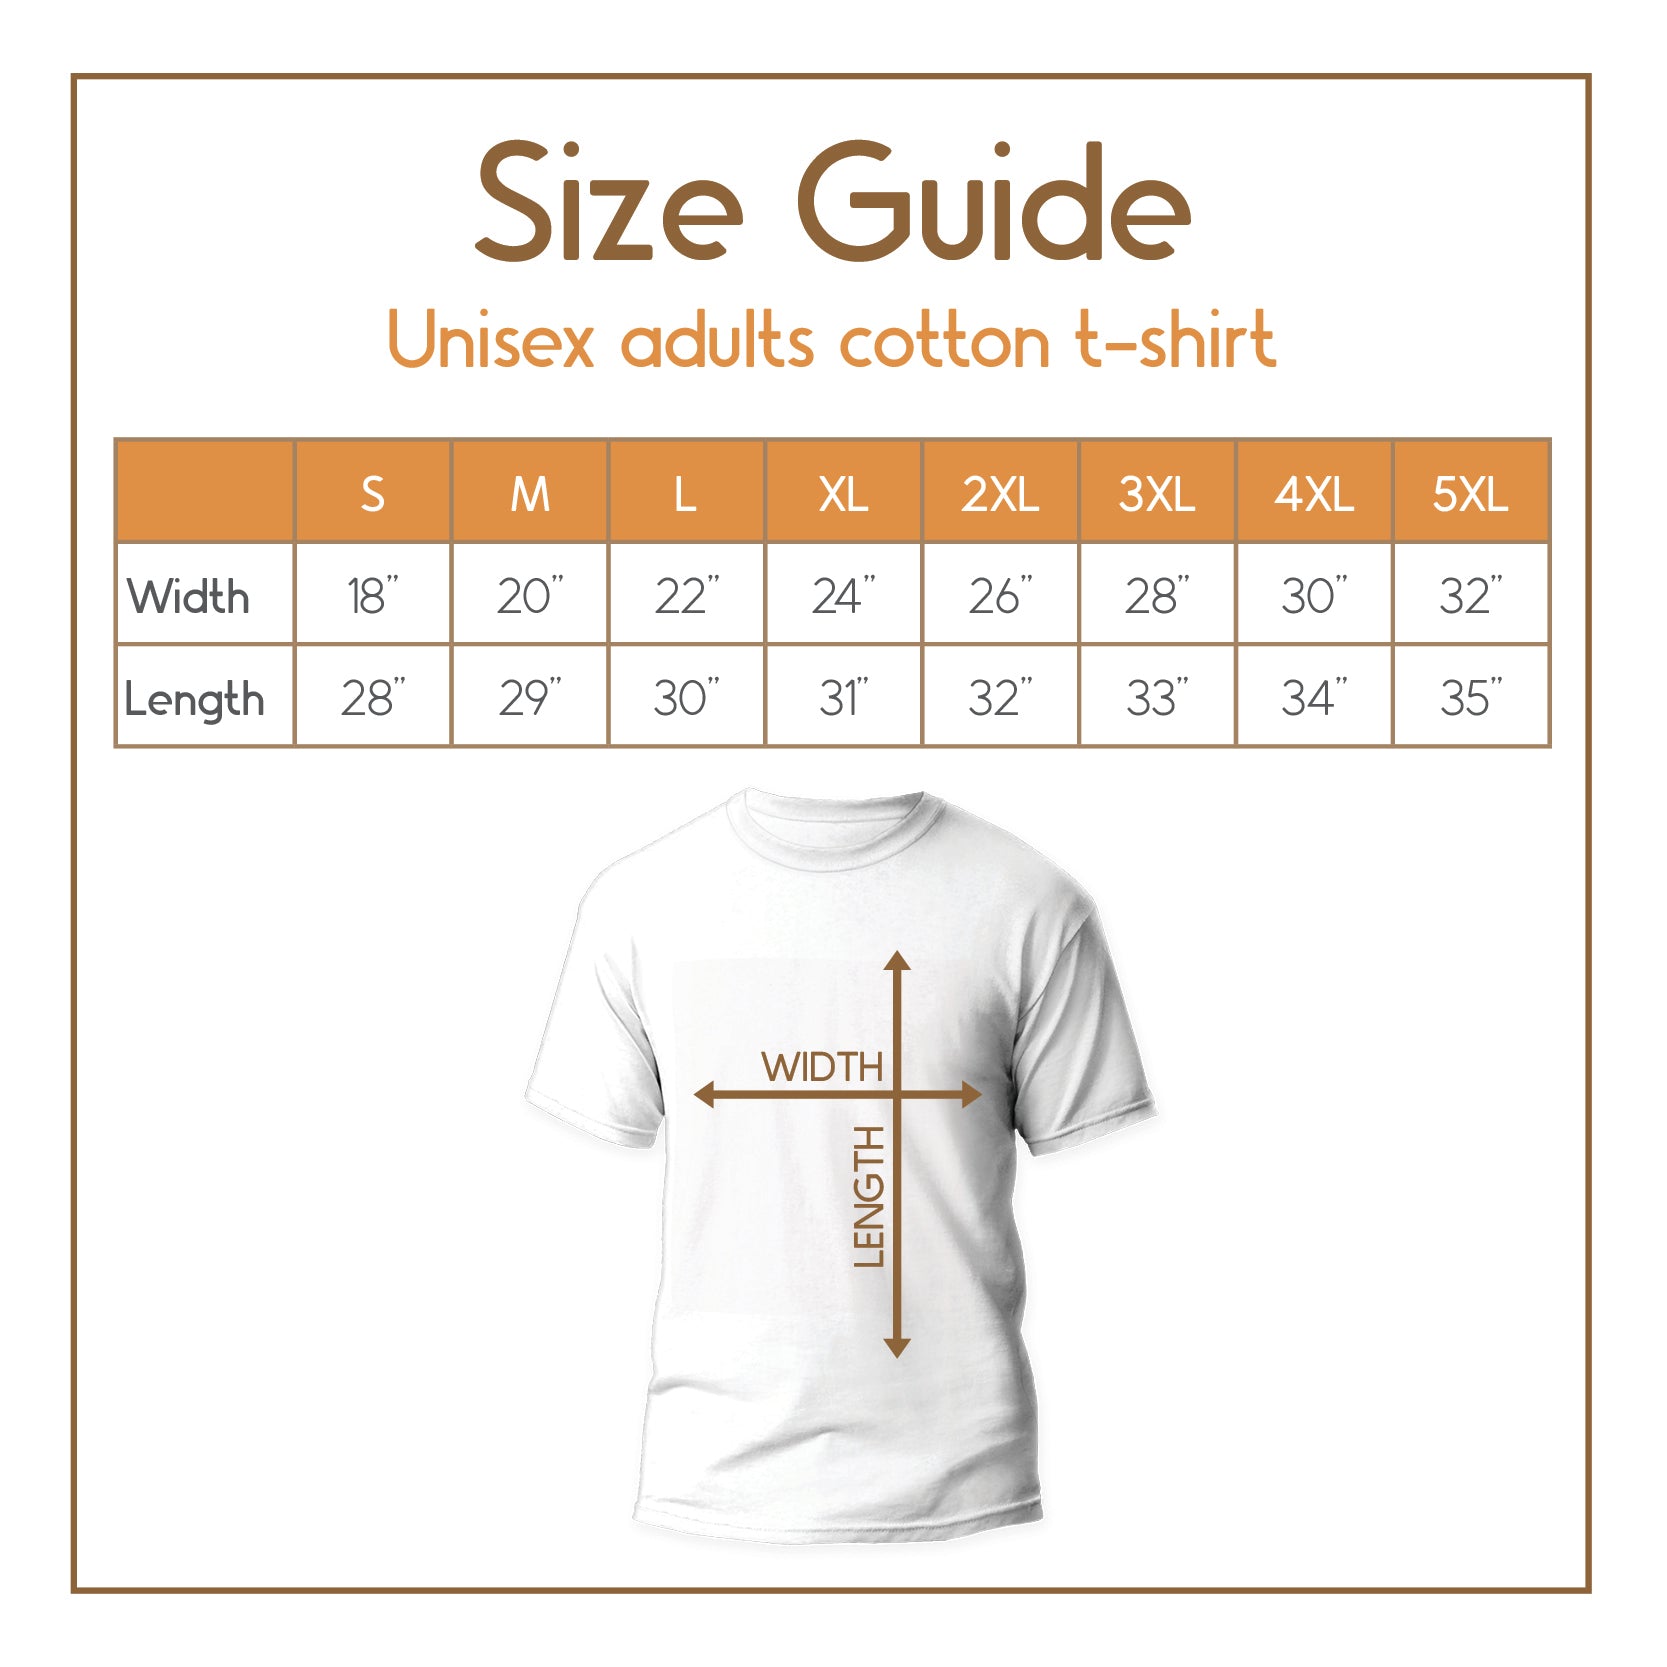 Dream Big tee size guide